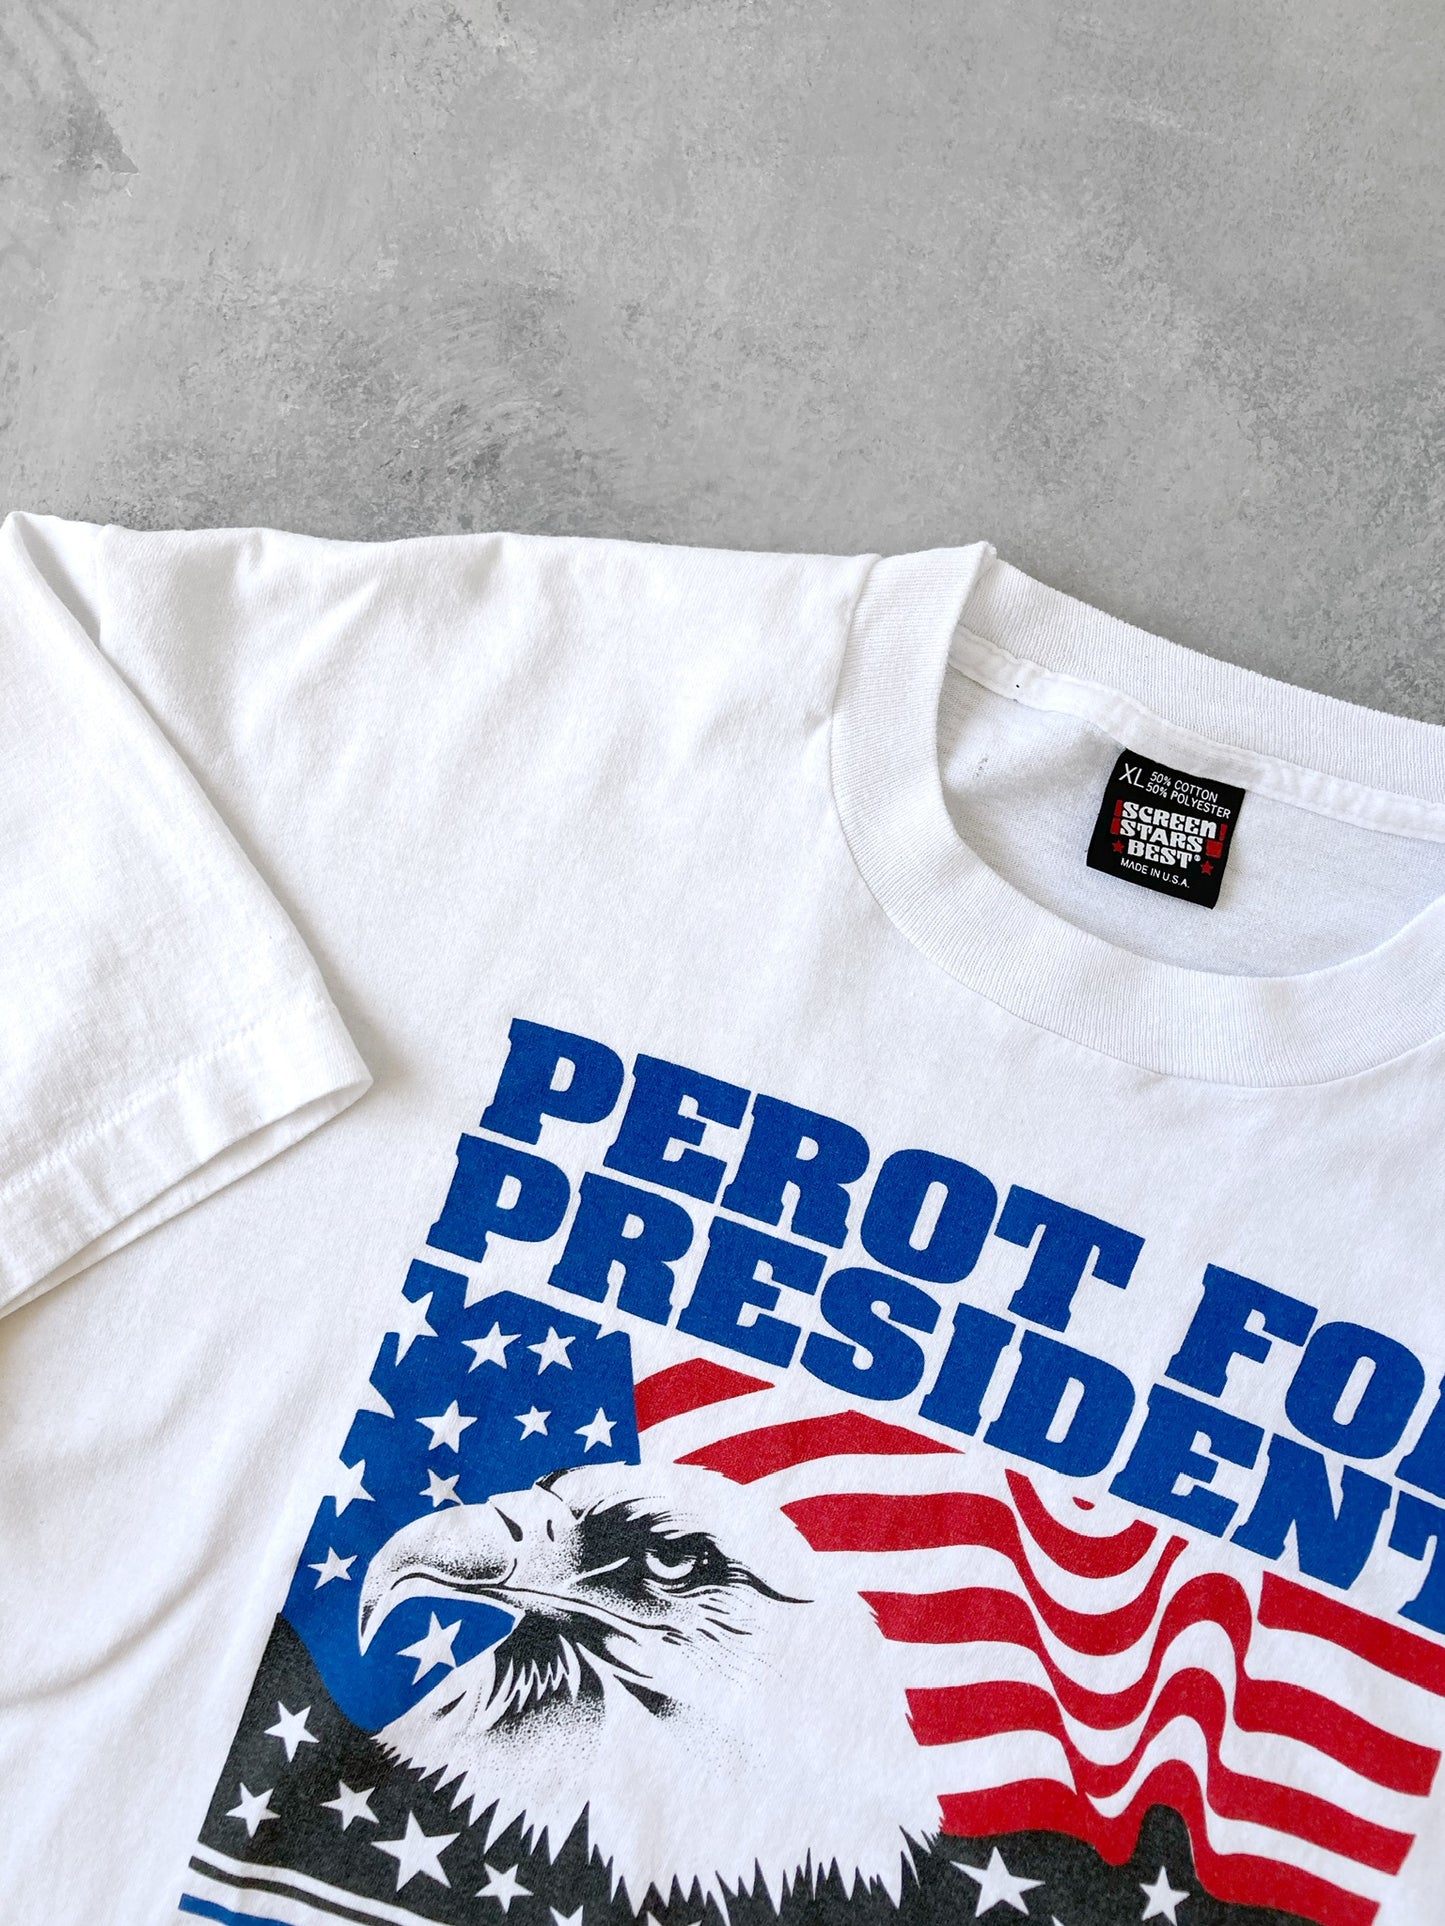 Perot for President T-Shirt 90's - XL